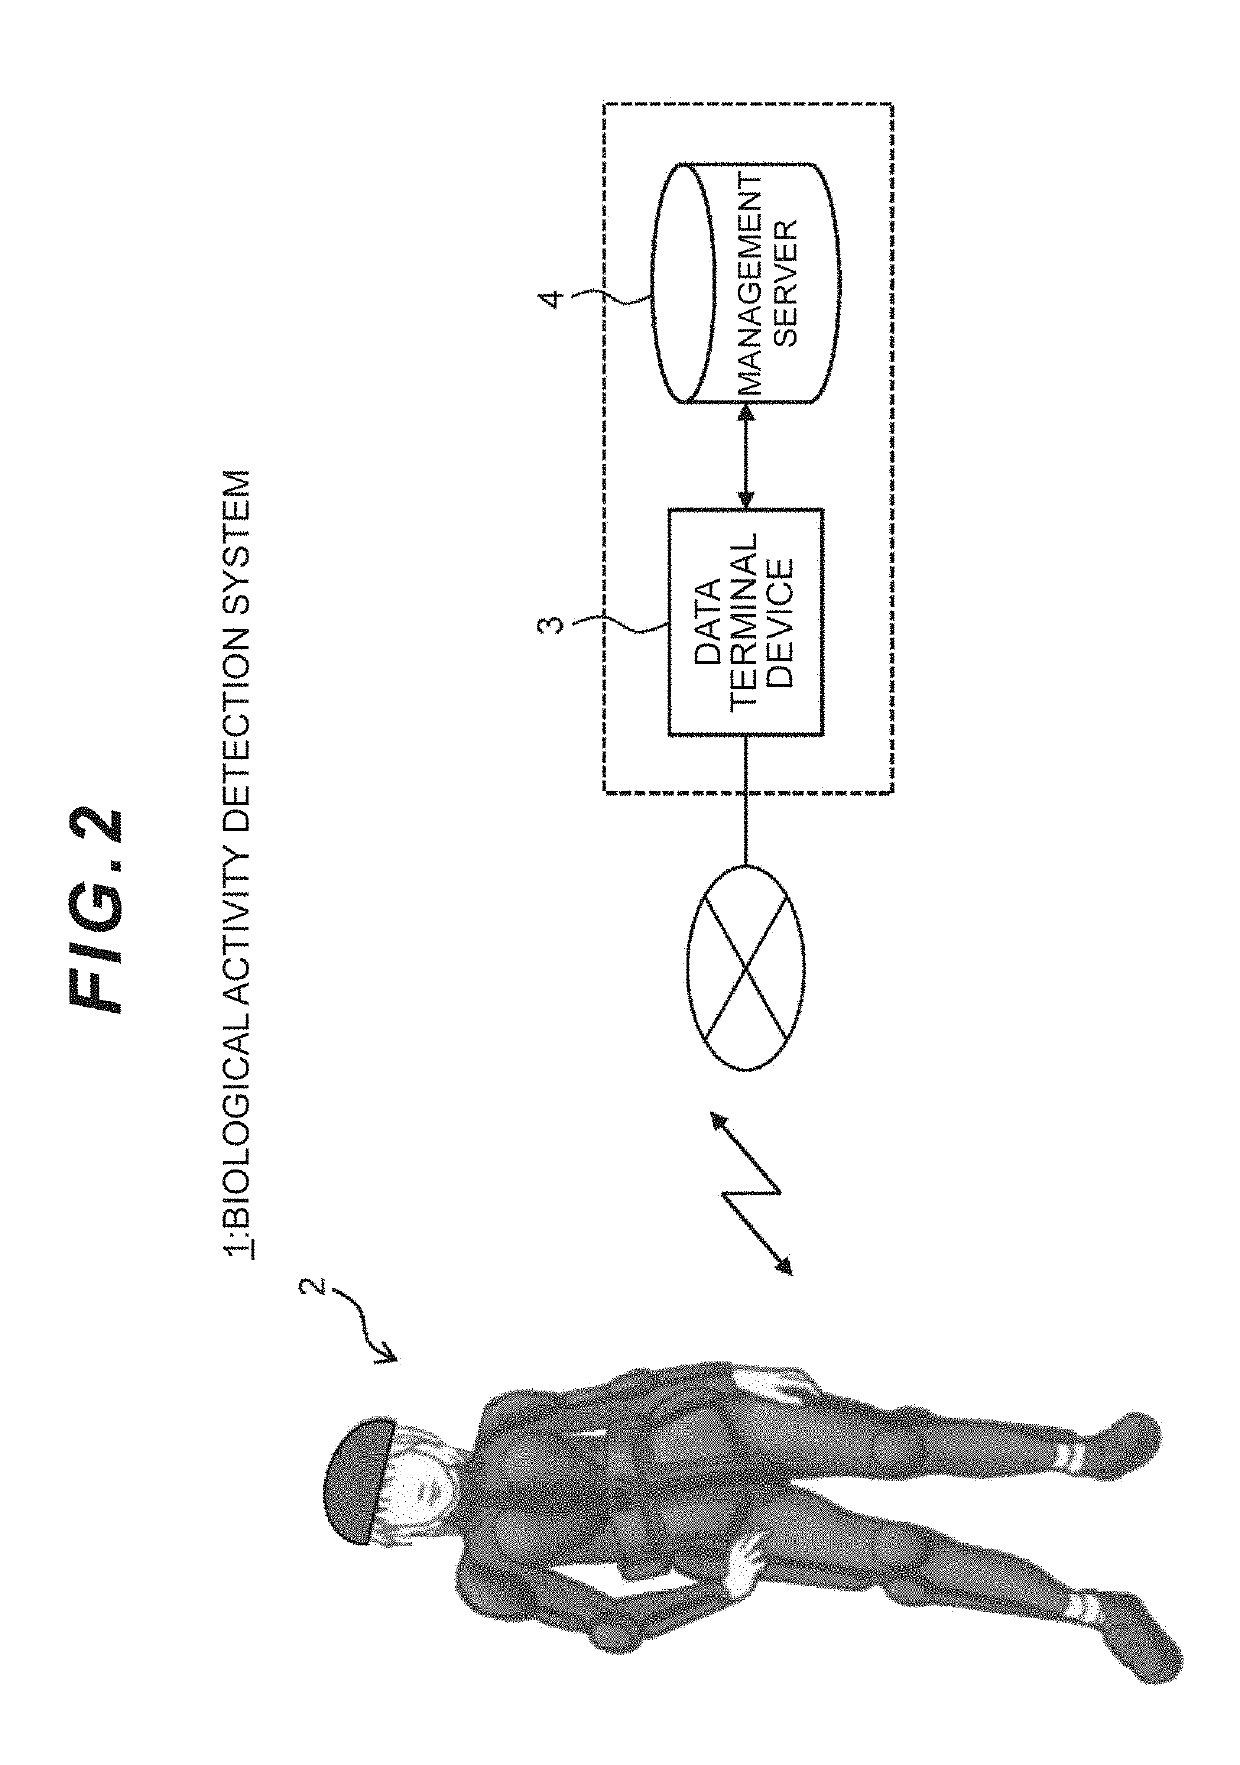 Biological activity detection apparatus and biological activity detection system